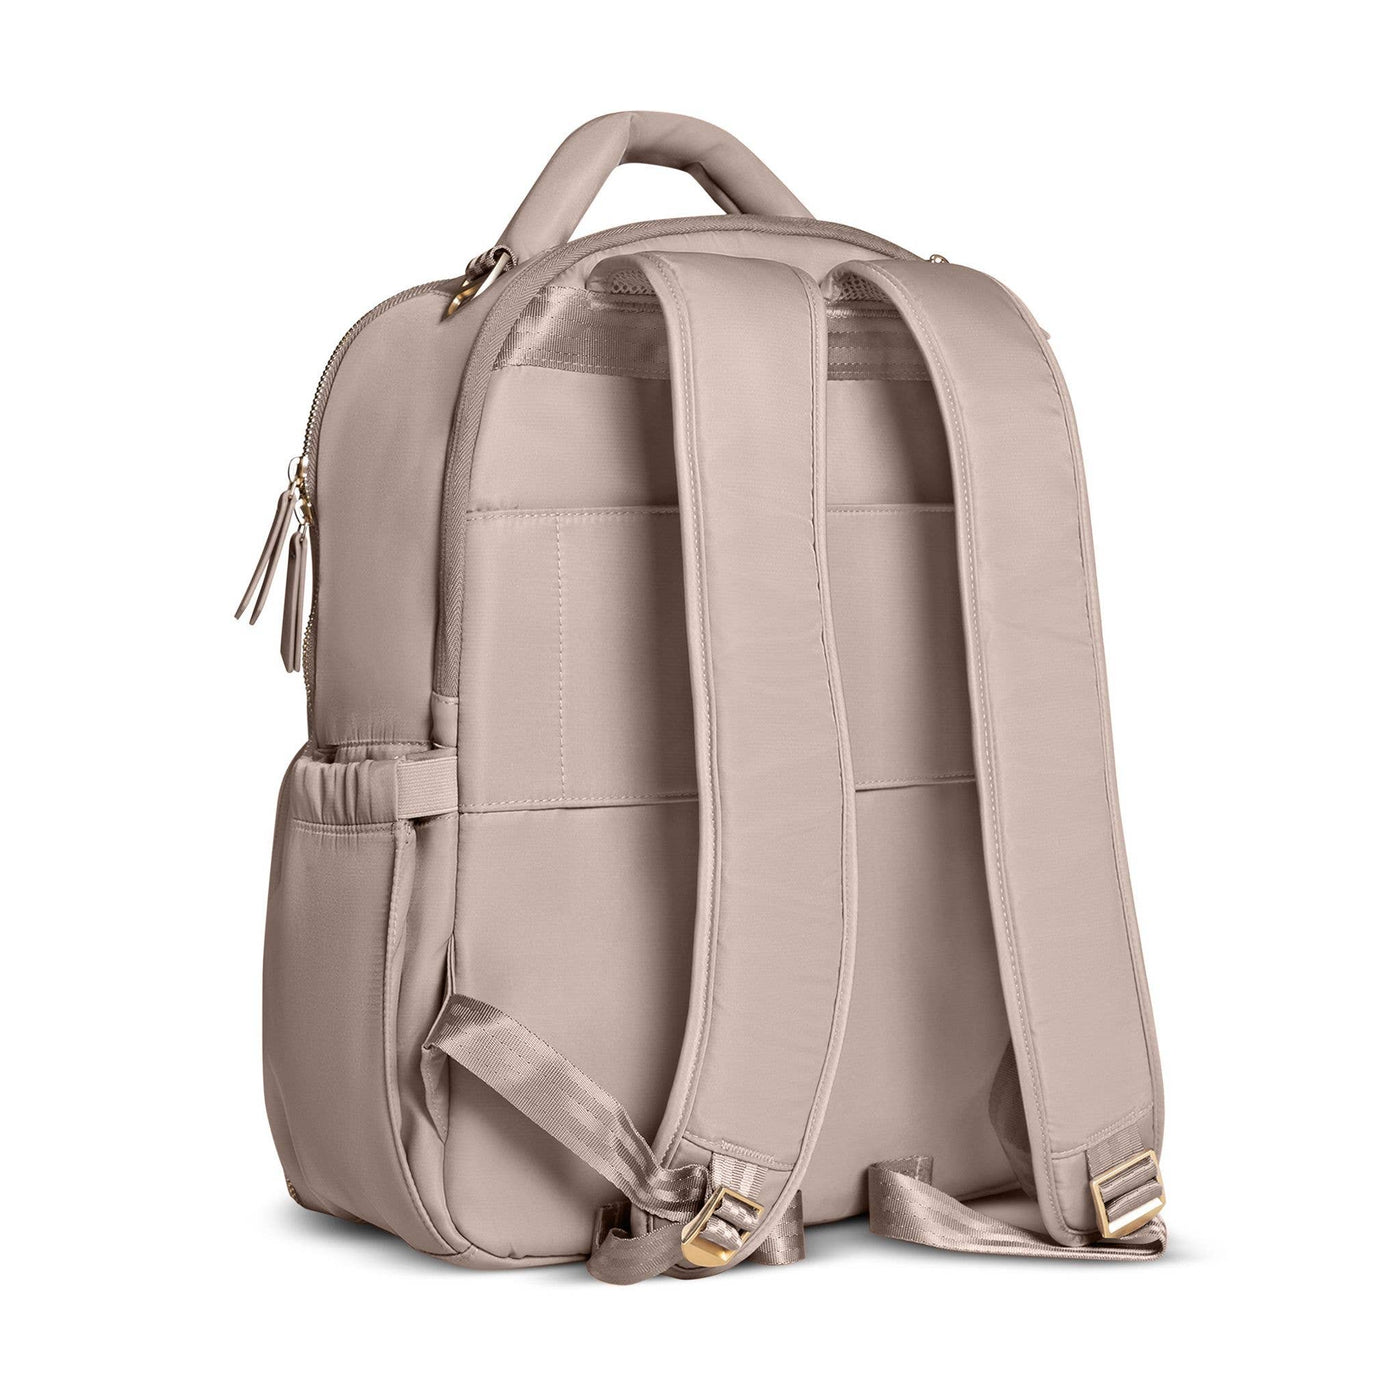 JUJUBE - Classic Backpack Taupe